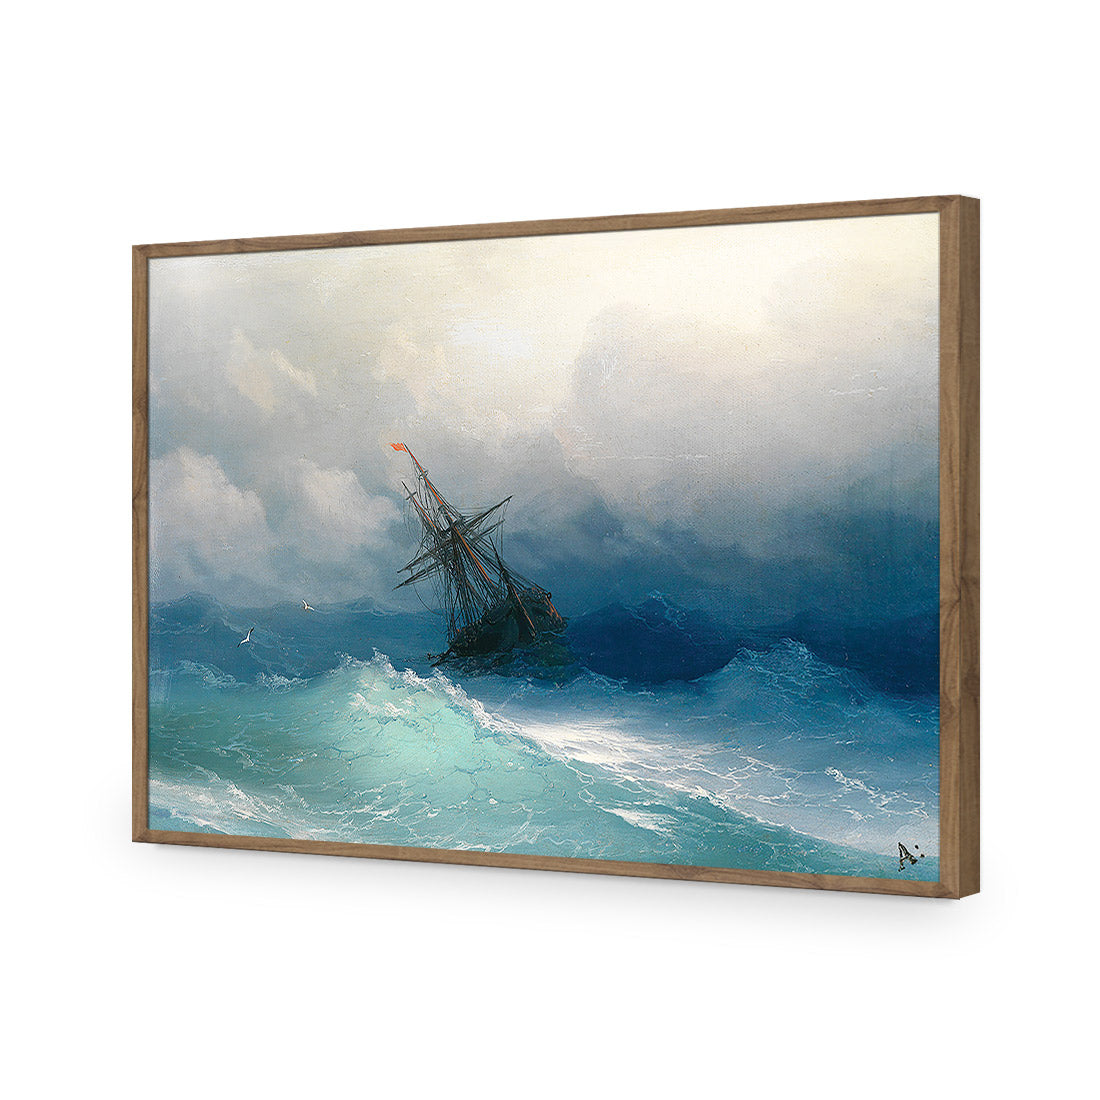 Caught In A Storm - Ivan Aivazovsky Acrylic Glass Art-Acrylic-Wall Art Design-Without Border-Acrylic - Natural Frame-45x30cm-Wall Art Designs